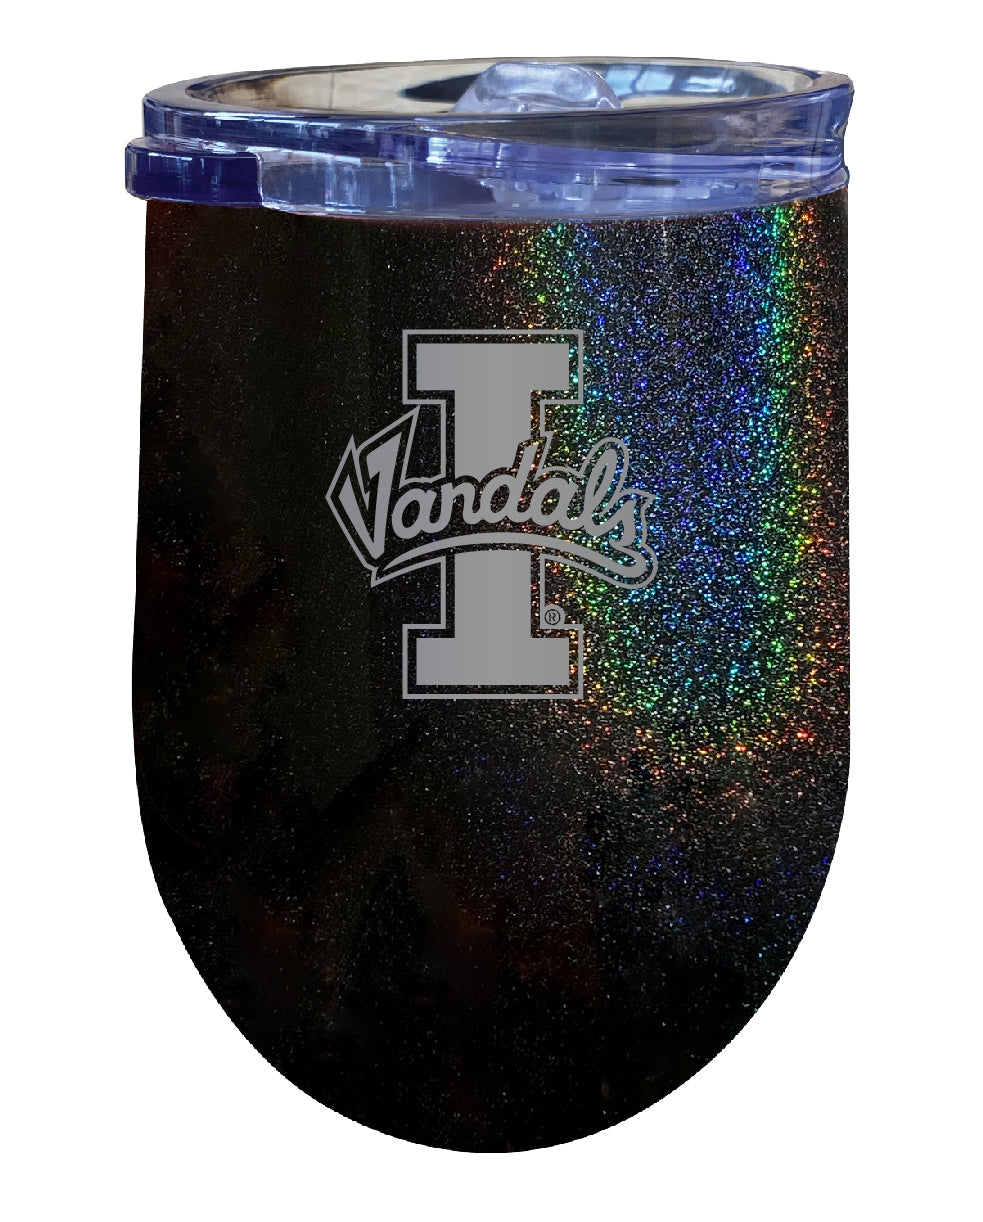 Idaho Vandals 12 oz Laser Etched Insulated Wine Stainless Steel Tumbler Rainbow Glitter Black